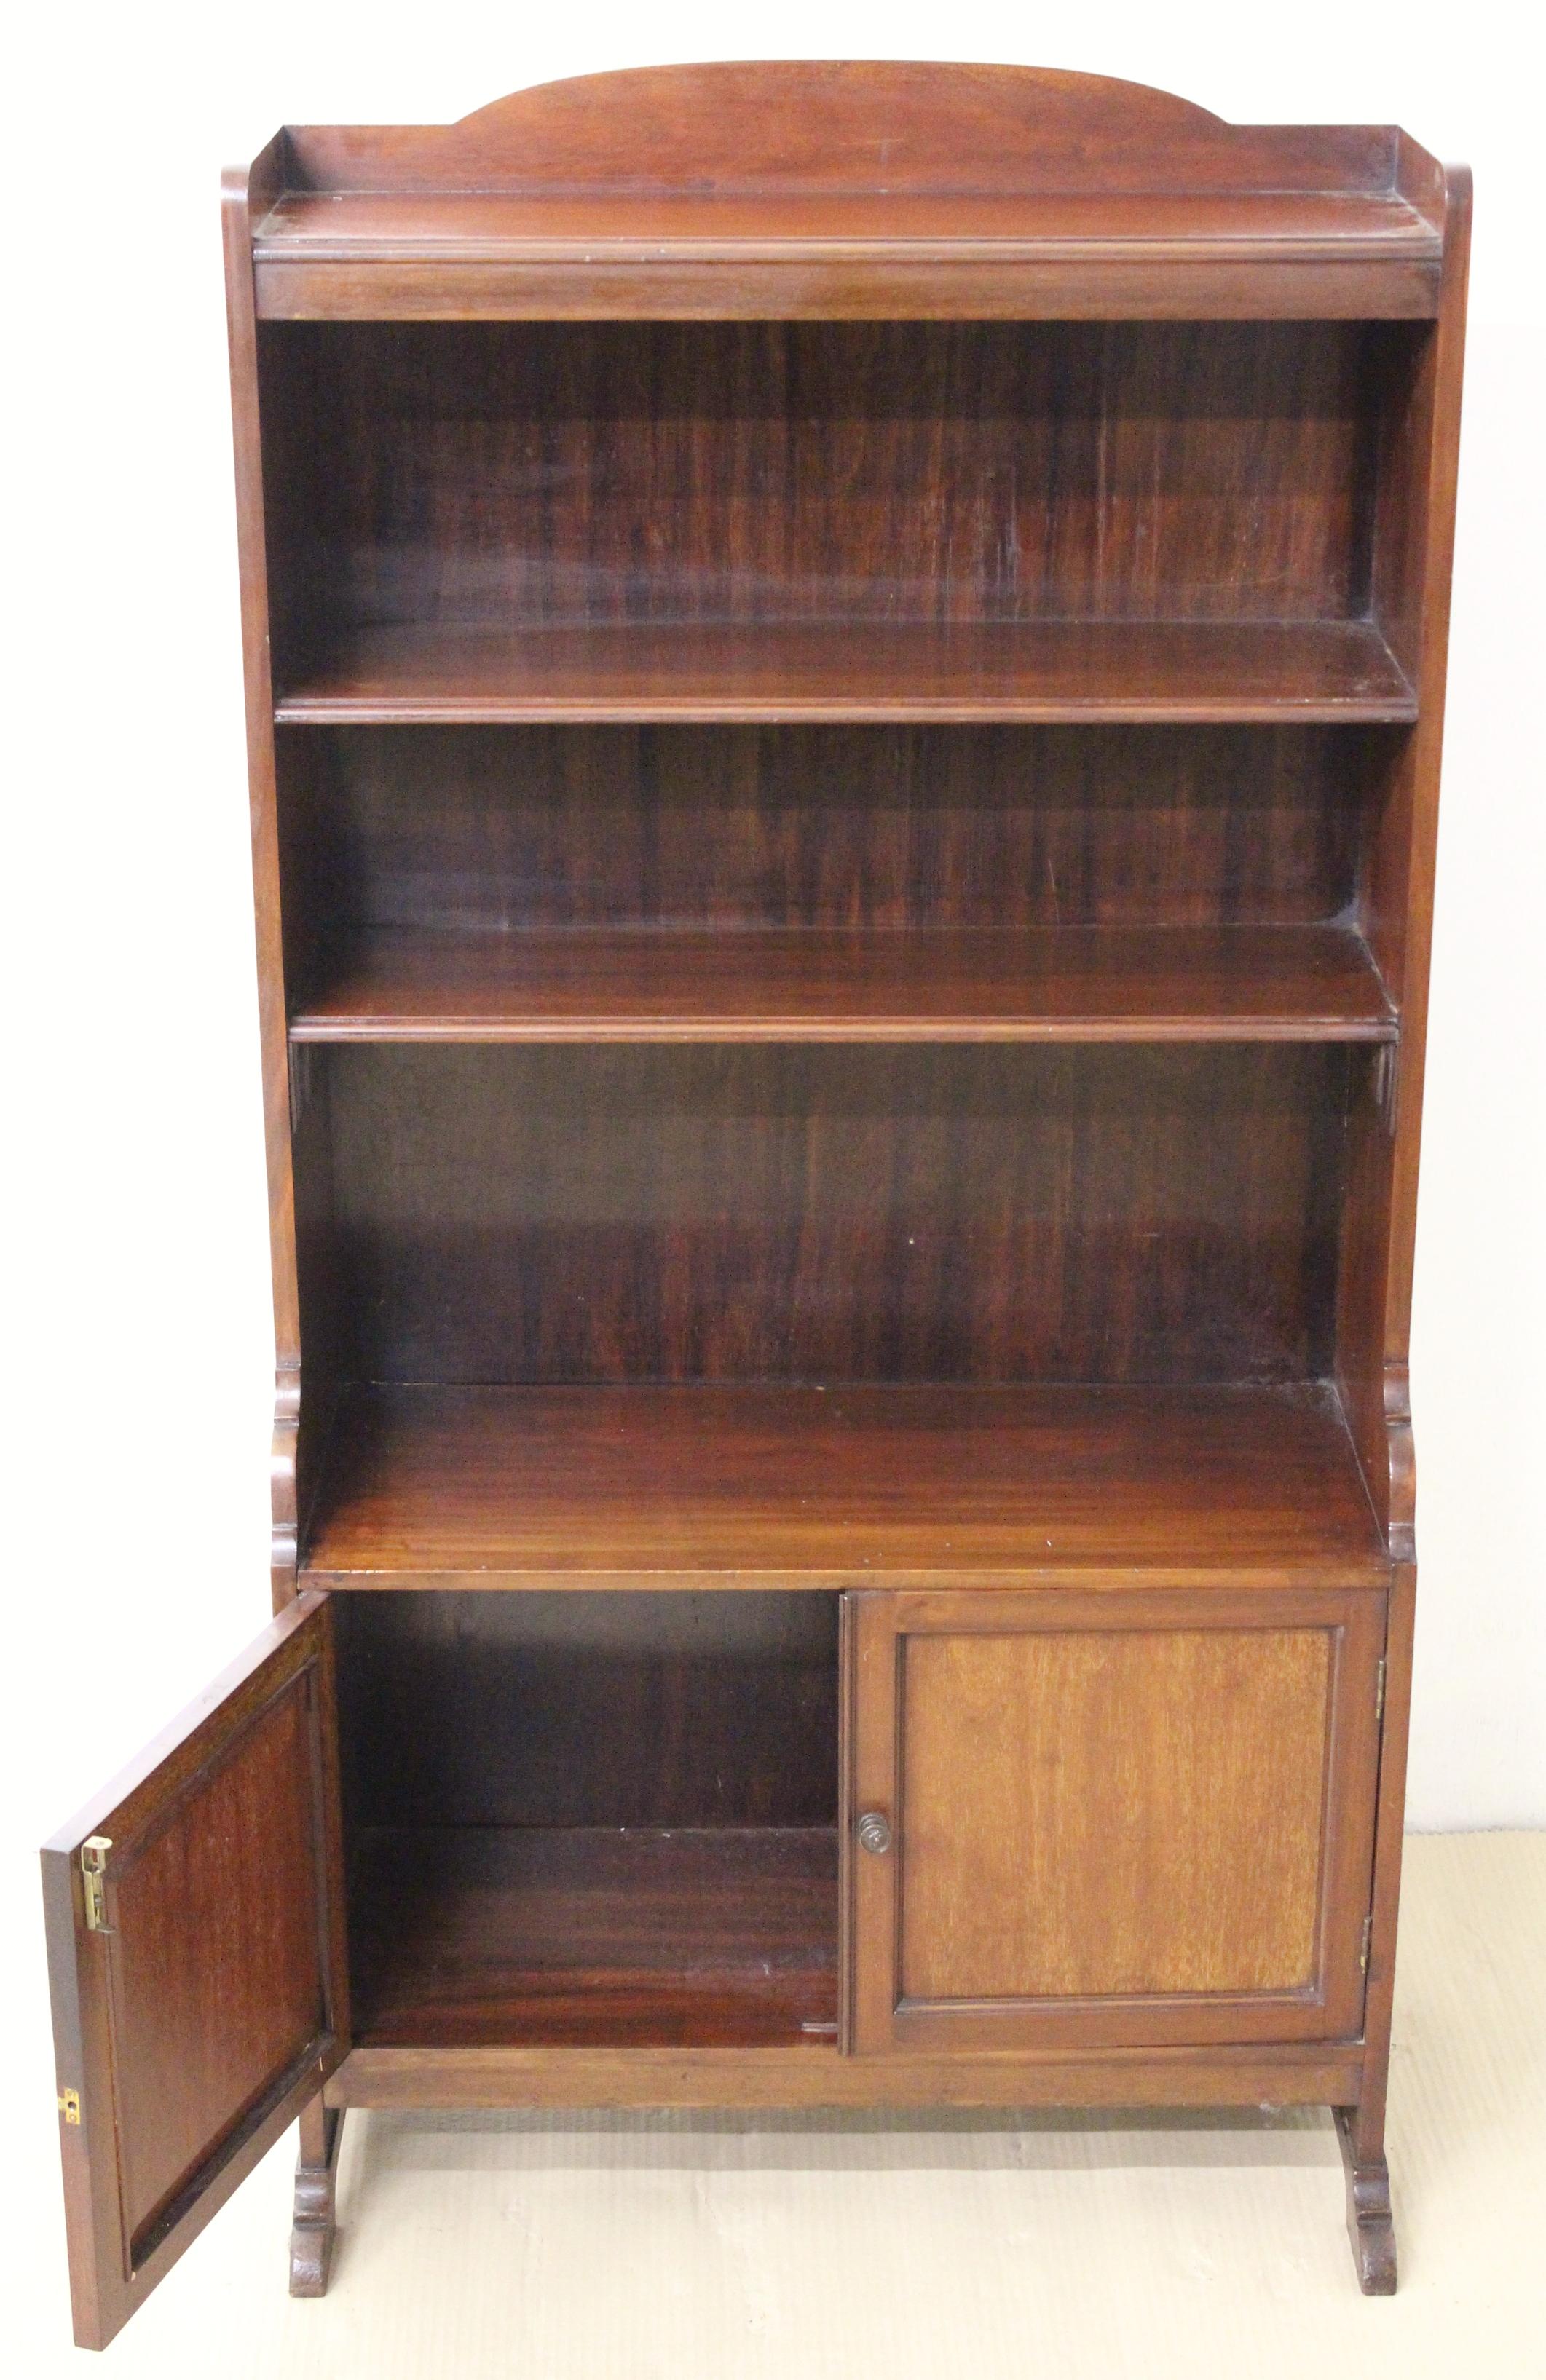 A good open bookcase in solid mahogany, of compact proportions. Well made in the Edwardian period from a very good grade of mahogany timber, now with a warm colour and patina. A series of 3 shelves offer good display space for books , or trinkets.